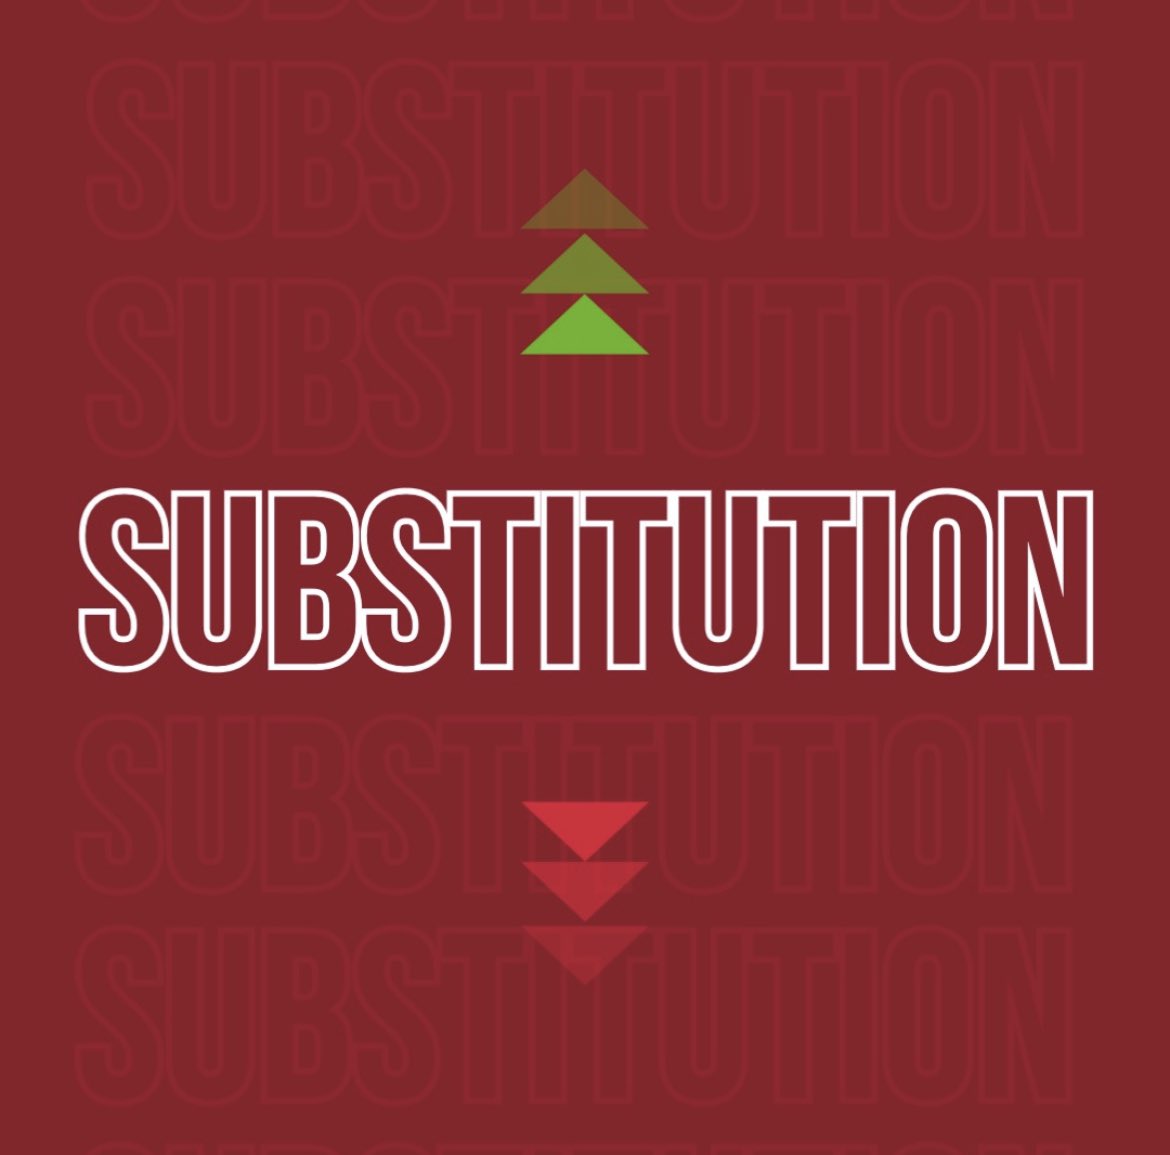 ⚽️ 66’ Boro Substitution: Off: Alex Wiles On: Dom Tear Tear returns to the pitch from injury, and it’s great to see him in the Boro shirt again!! CFC 2-1 SAFC #safclive